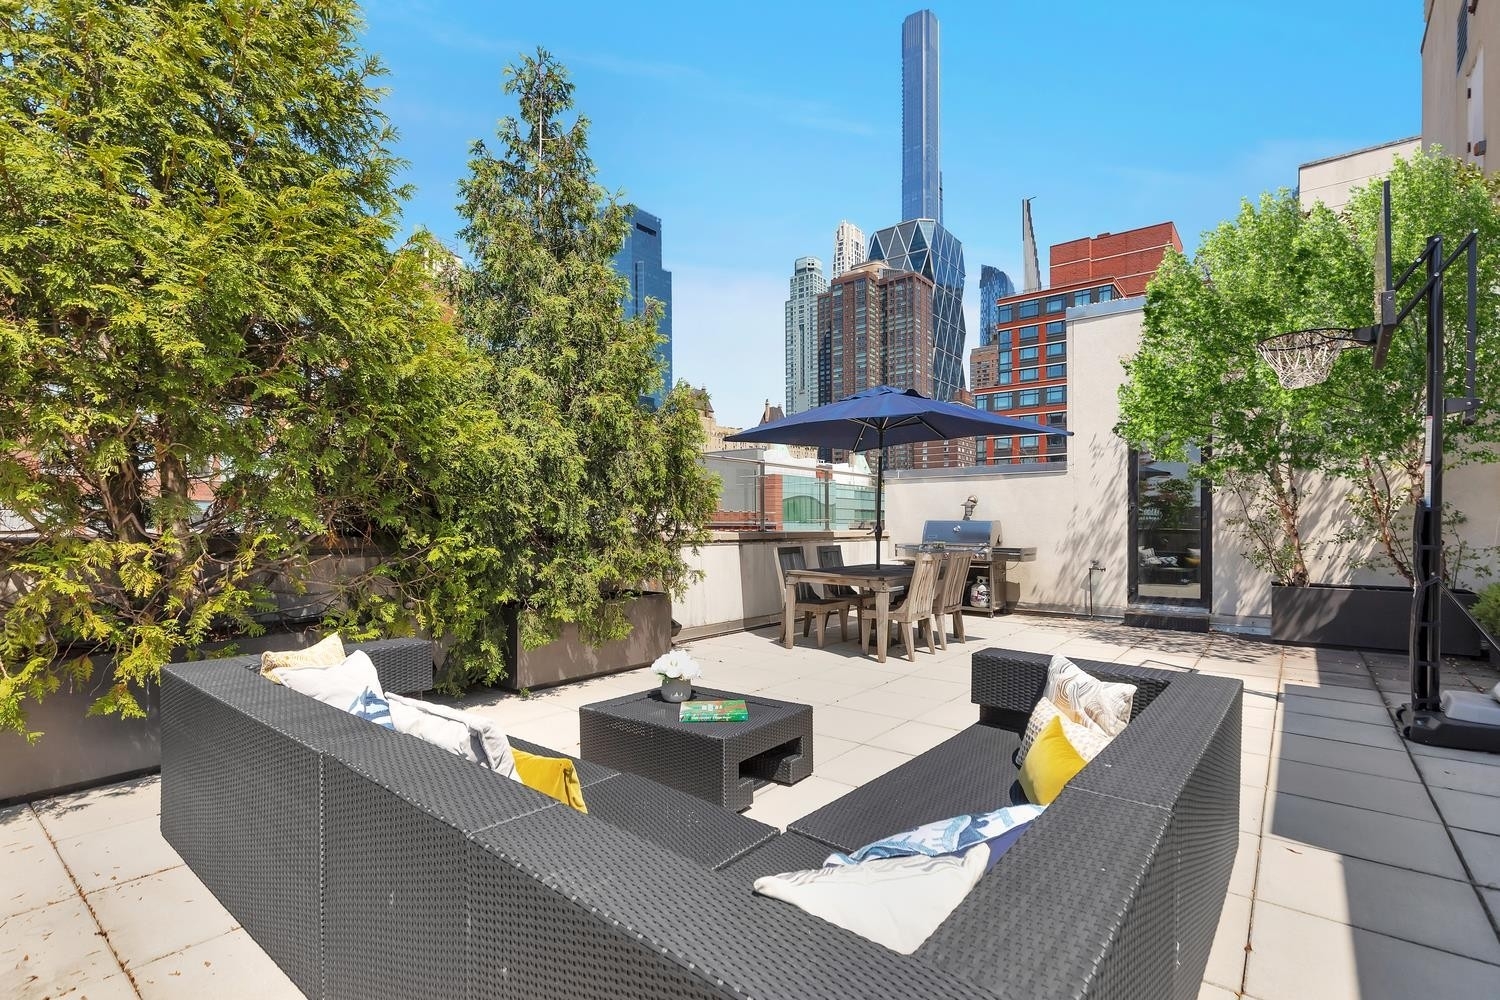 Condominium for Sale at The Hit Factory, 421 W 54TH ST, PHD Hell's Kitchen, New York, NY 10019